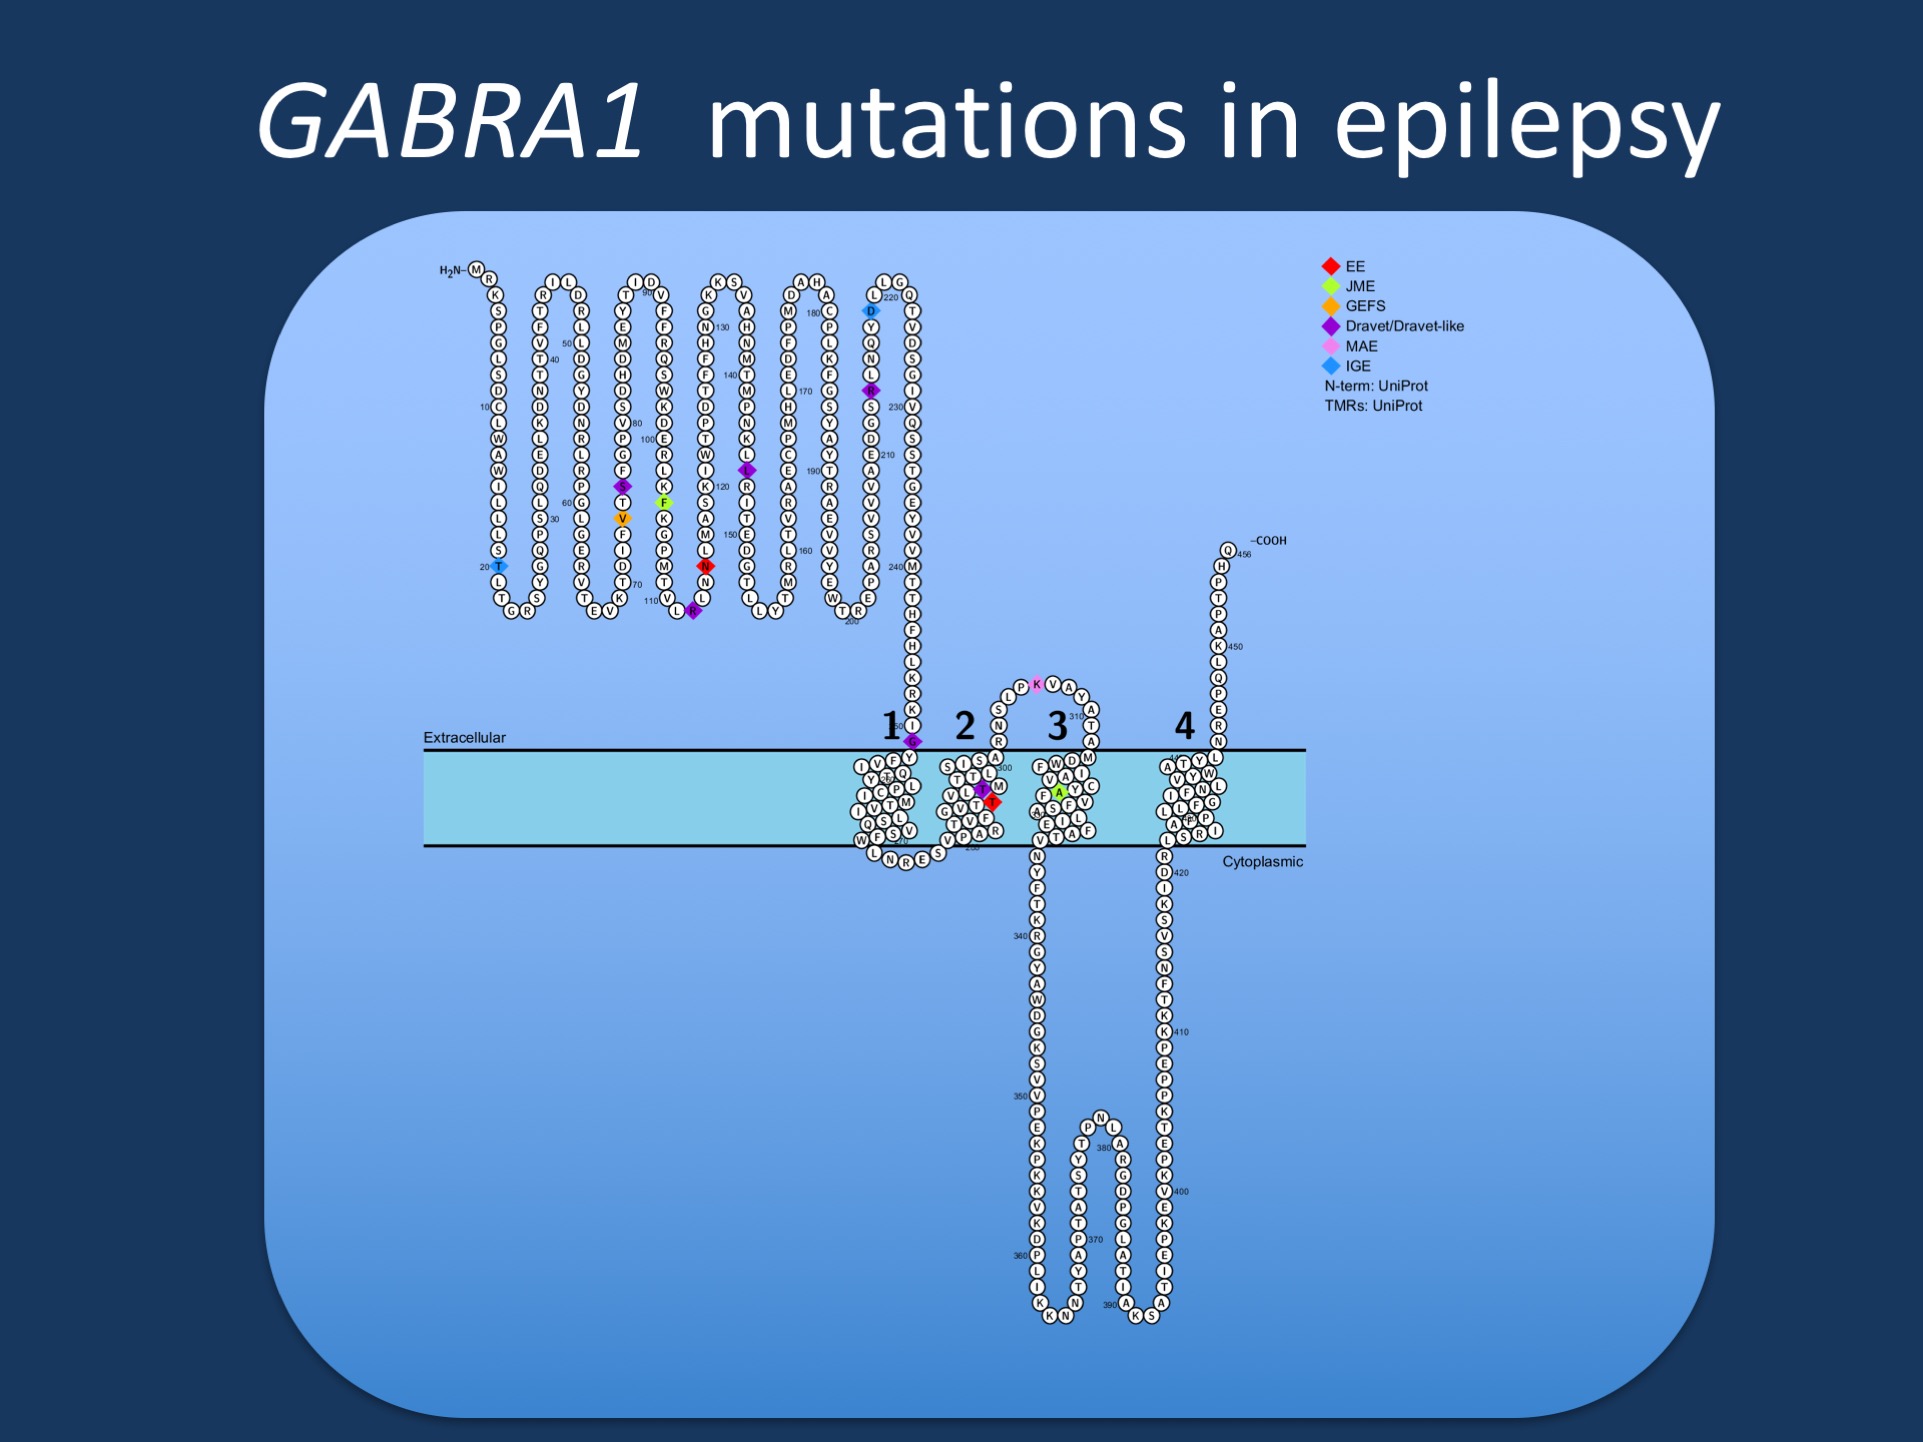 Figure. Pathogenic variants in GABRA1 in various phenotypes reported by Johannsen and collaborators. GABRA1 was initially identified in patients with Juvenile Myoclonic Epilepsy (JME), but most reported patients to date have more severe epilepsies such as epileptic encephalopathies (EE), Juvenile Myoclonic Epilepsy (JME), Dravet Syndrome, or Myoclonic Astatic Epilepsy (MAE). Few patients have milder phenotypes such as Genetic/Generalized Epilepsy with Febrile Seizures Plus (GEFS+). 